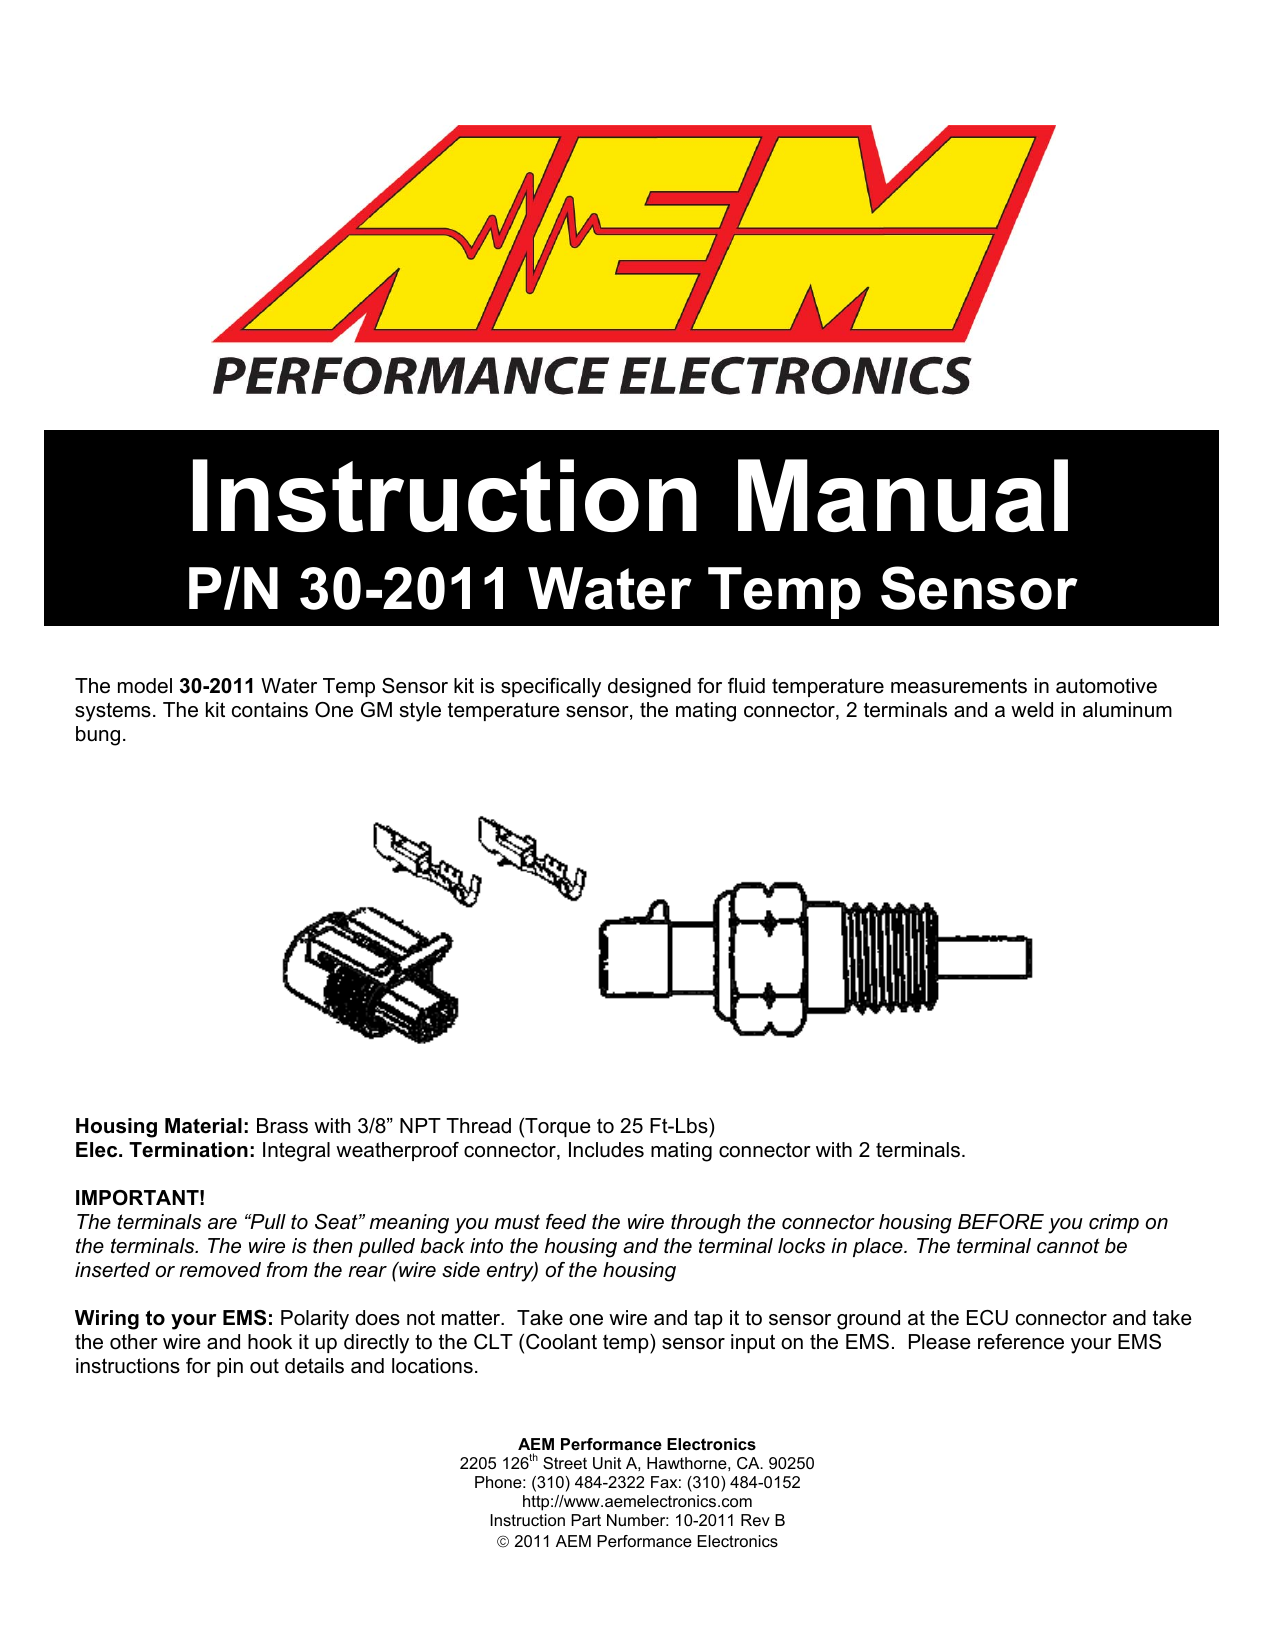 WATER TEMP SENSOR WITH CONNECTOR AND PINS 3/8"NPT WORKS WITH AEM